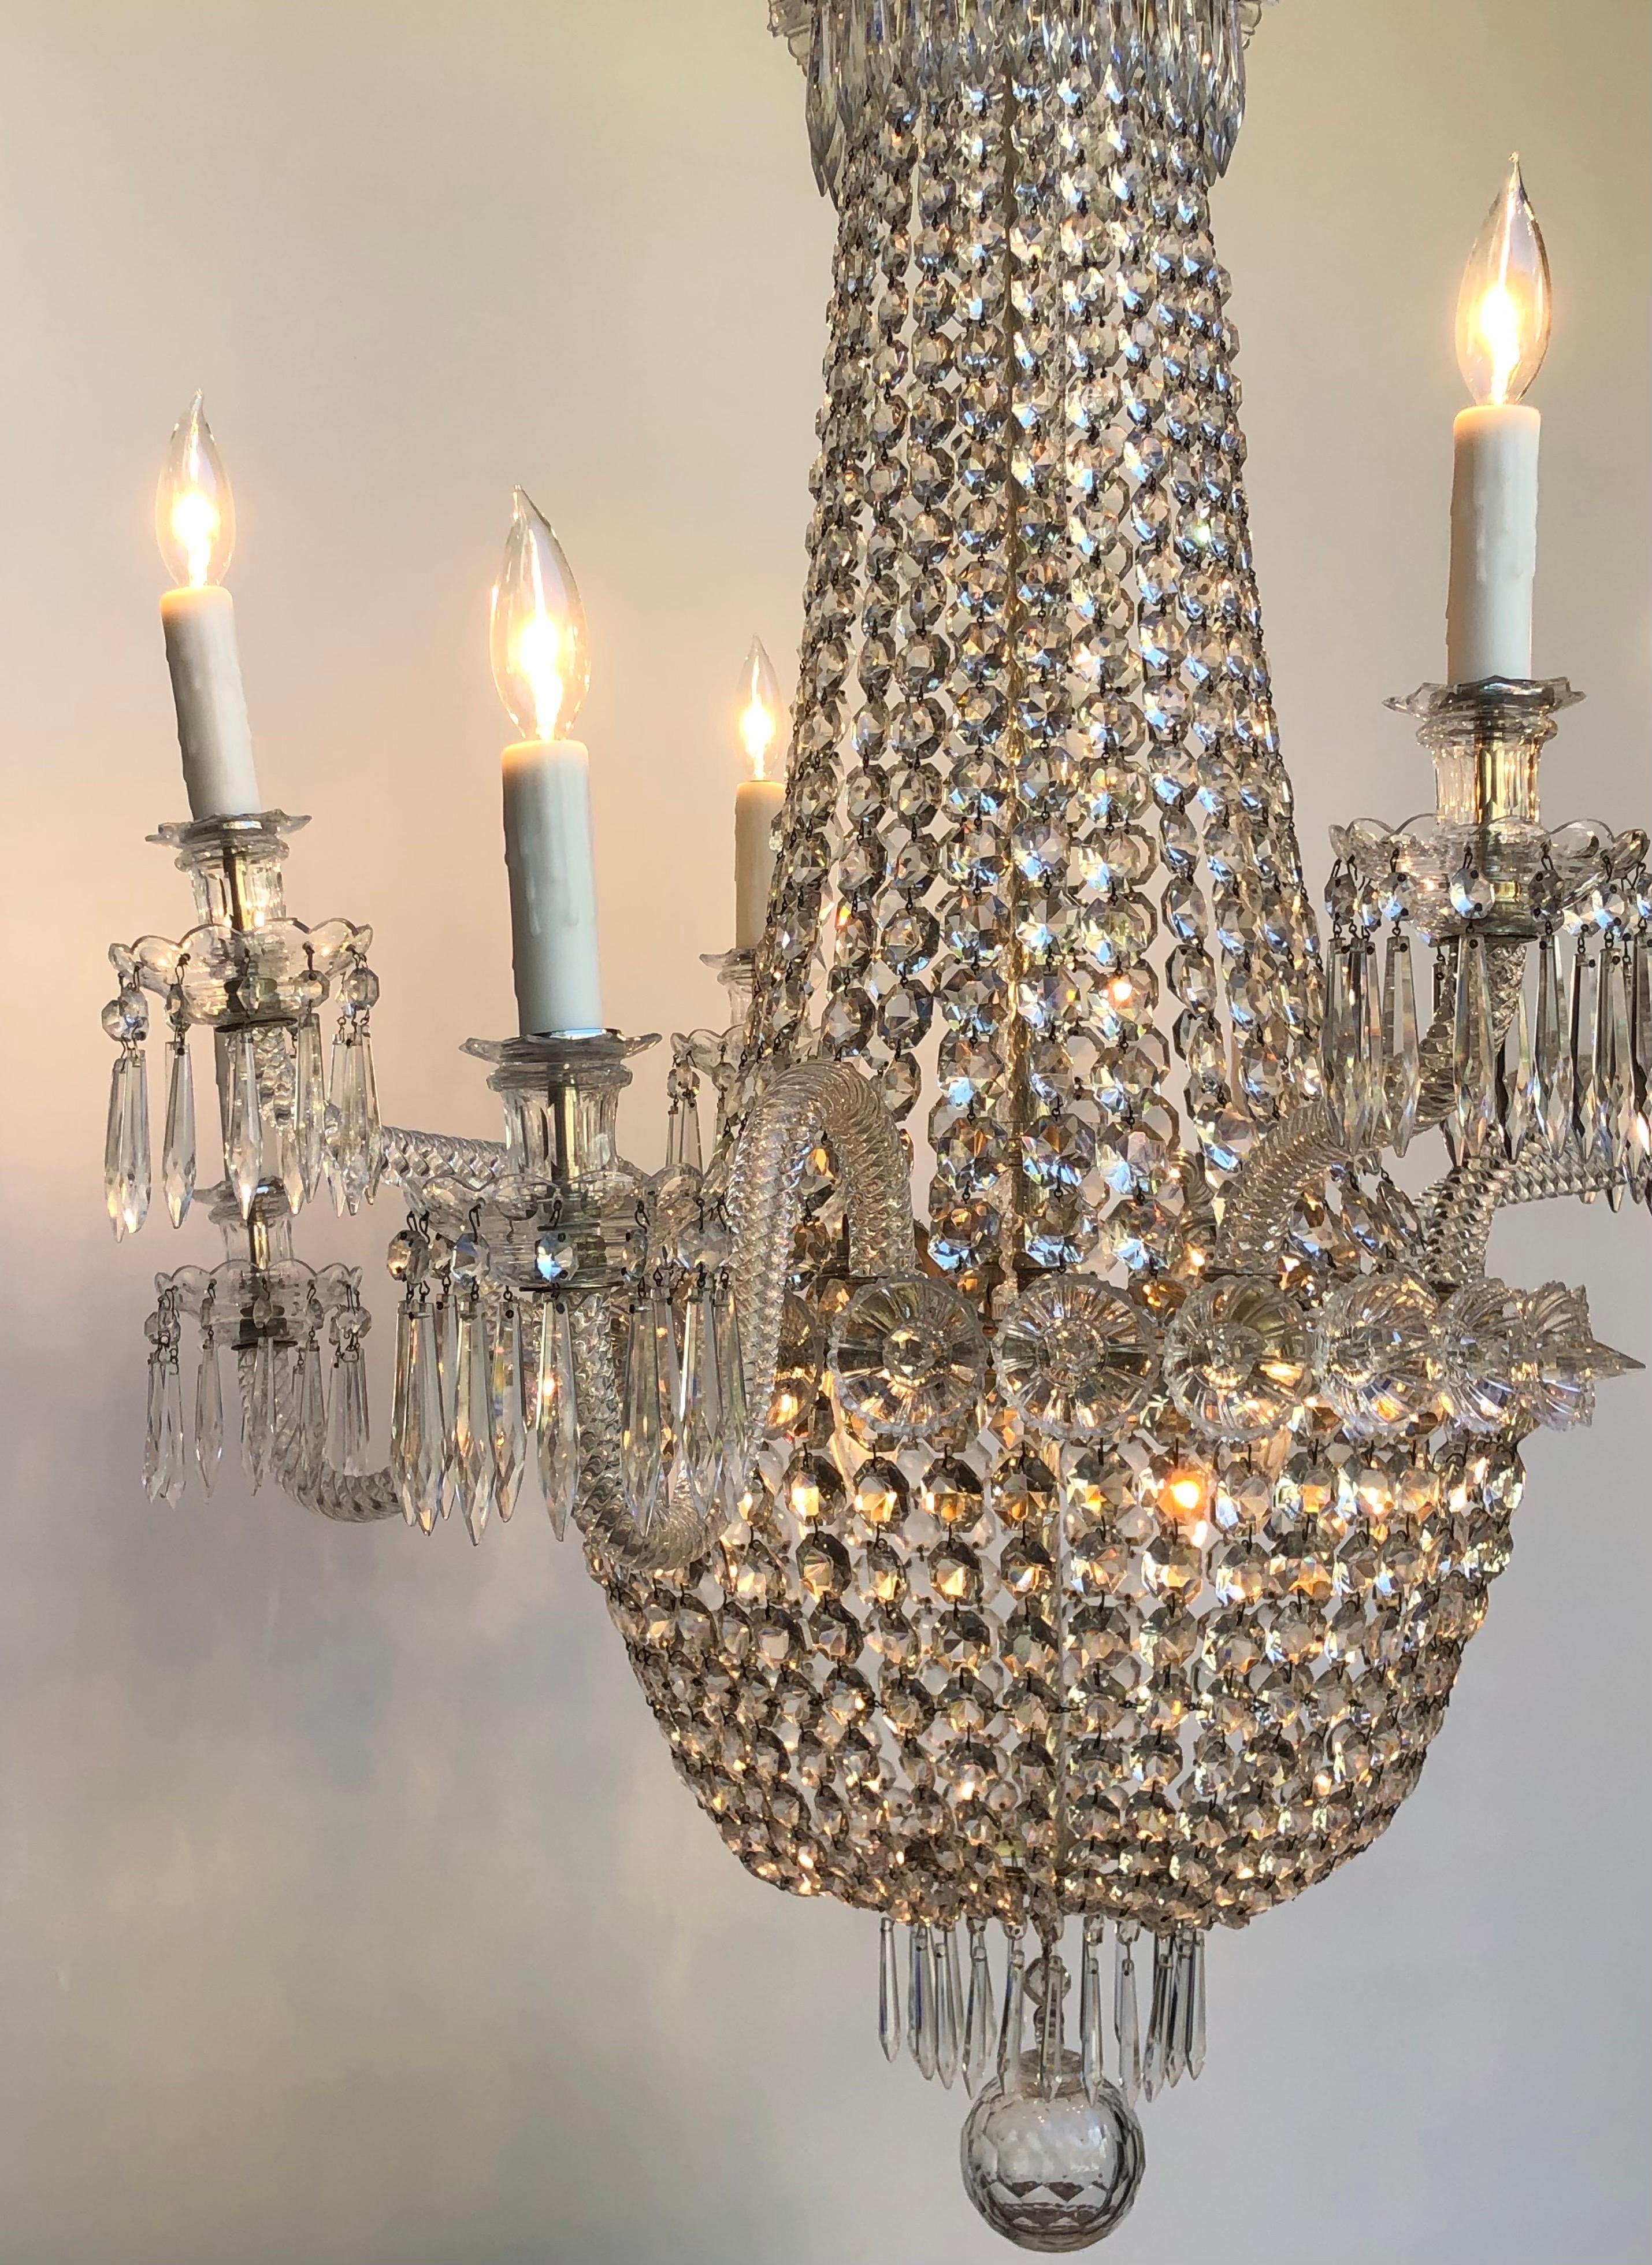 Plated Regency Tent-and-Basket Silver Plate & Crystal Chandelier / Gasolier Eight Light For Sale